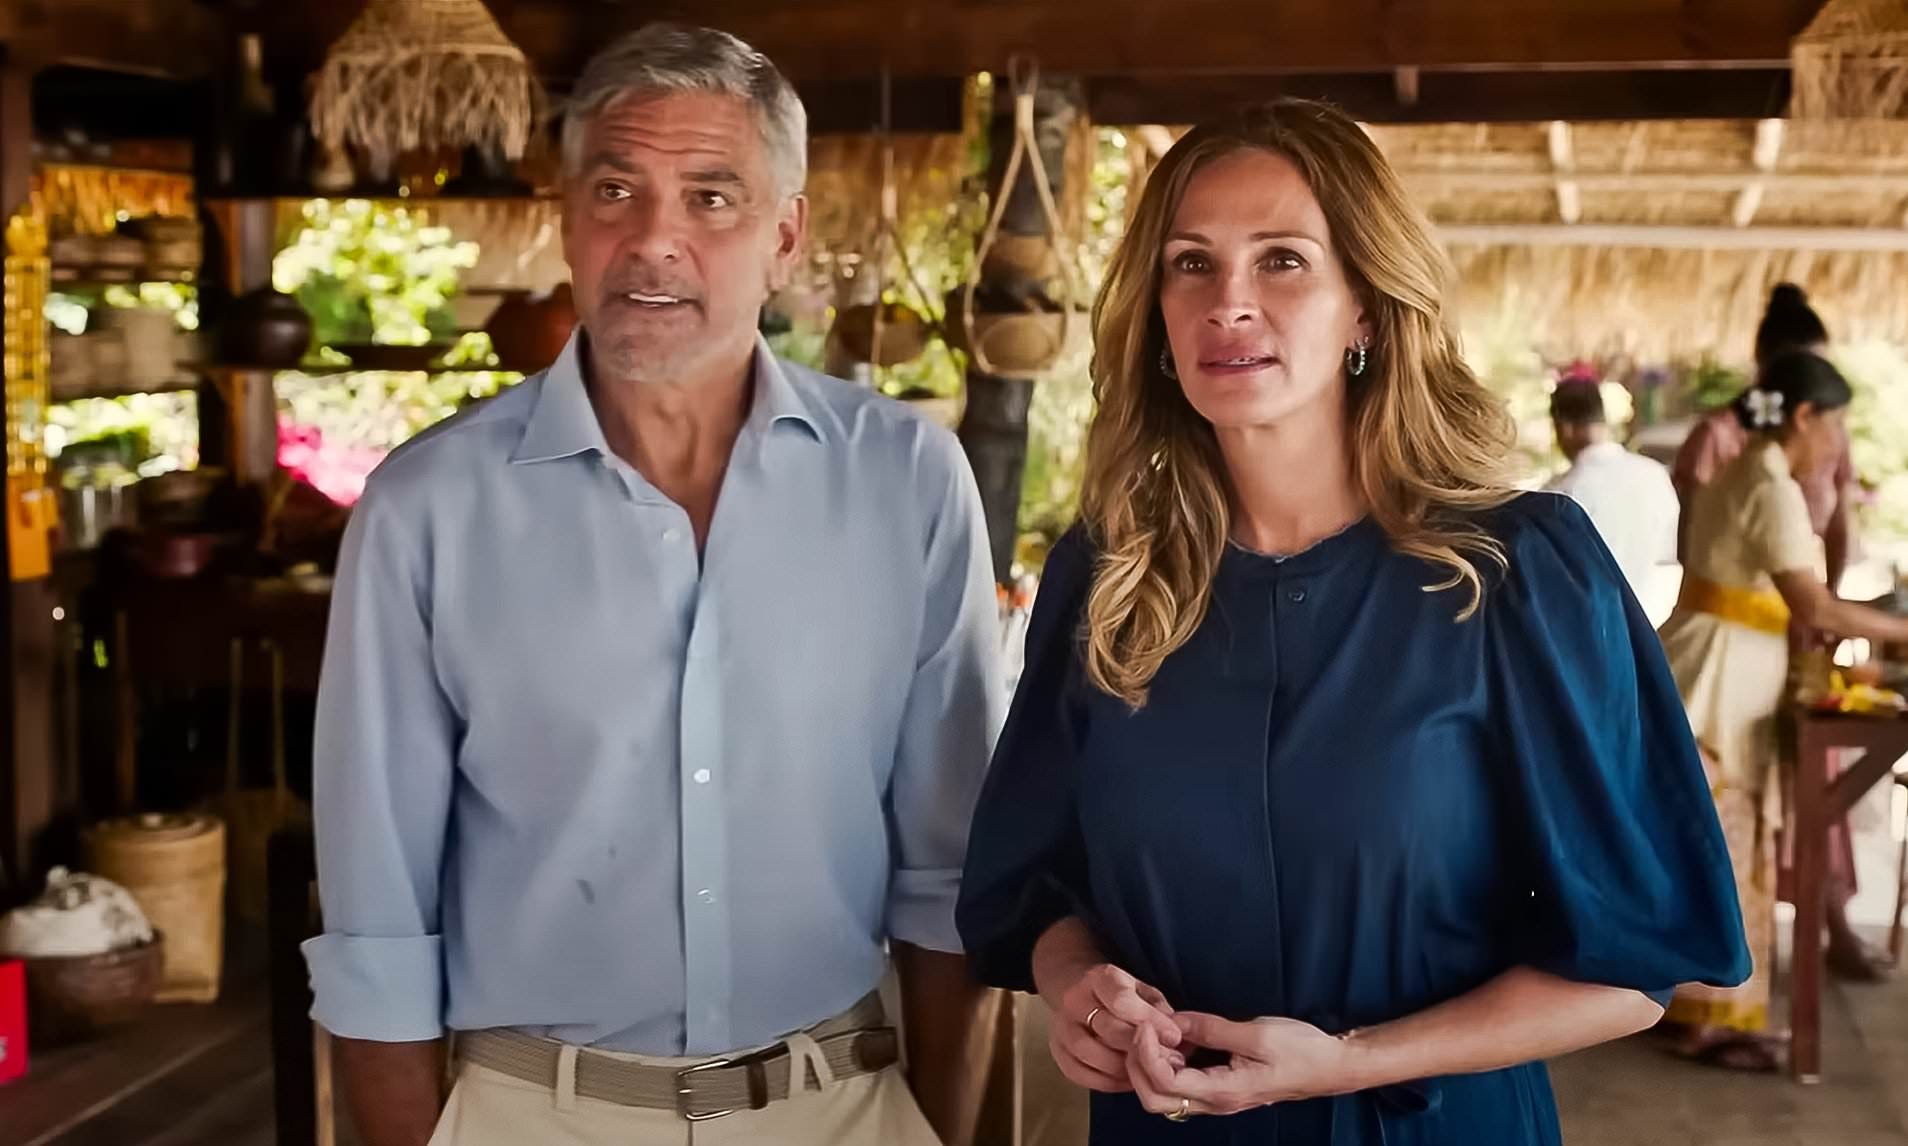 Universal Drops Trailer for George Clooney, Julia Roberts Pic at